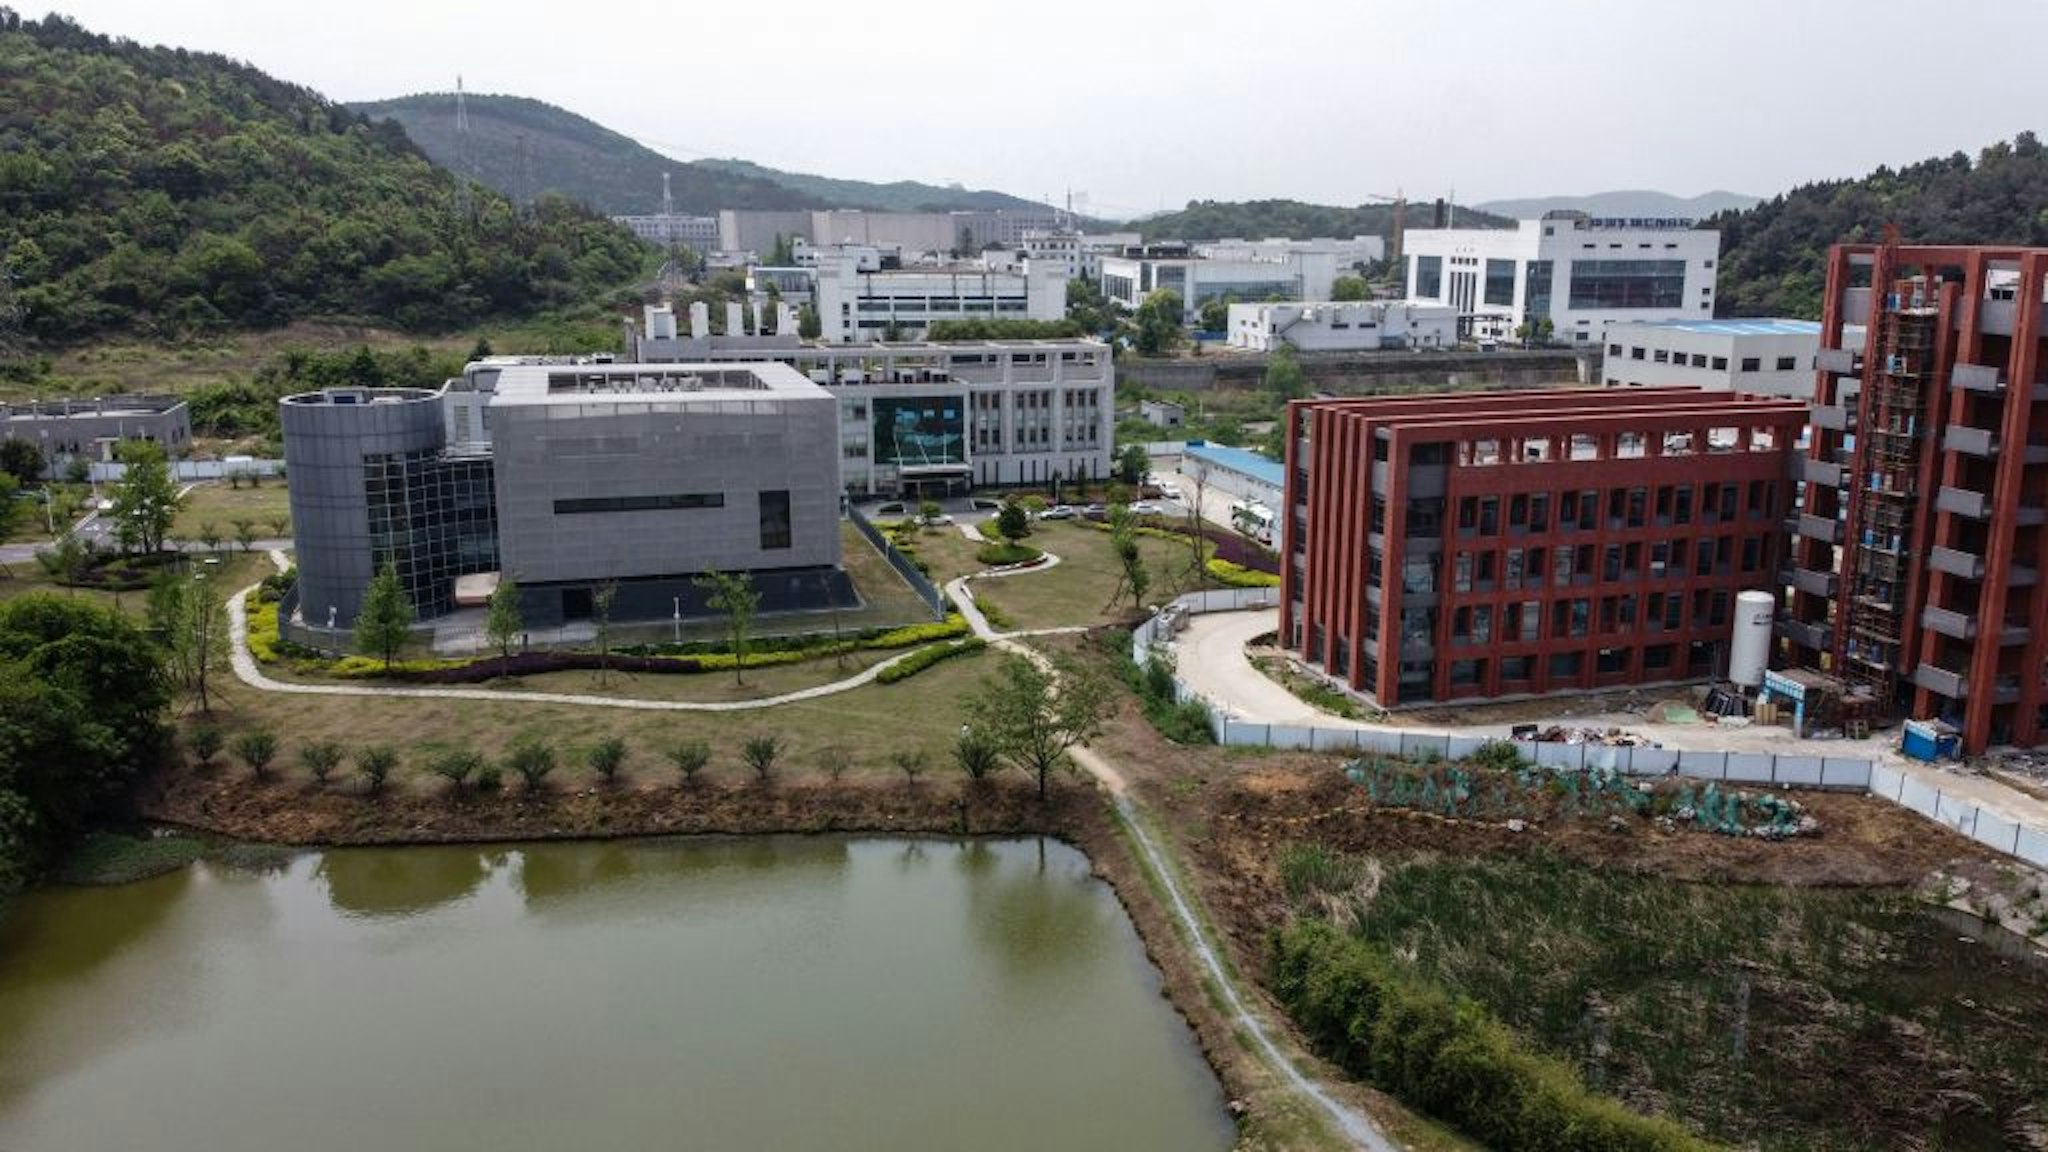 An aerial view shows the P4 laboratory (L) at the Wuhan Institute of Virology in Wuhan in China's central Hubei province on April 17, 2020. - The P4 epidemiological laboratory was built in co-operation with French bio-industrial firm Institut Merieux and the Chinese Academy of Sciences. The facility is among a handful of labs around the world cleared to handle Class 4 pathogens (P4) - dangerous viruses that pose a high risk of person-to-person transmission. (Photo by Hector RETAMAL / AFP) (Photo by HECTOR RETAMAL/AFP via Getty Images)